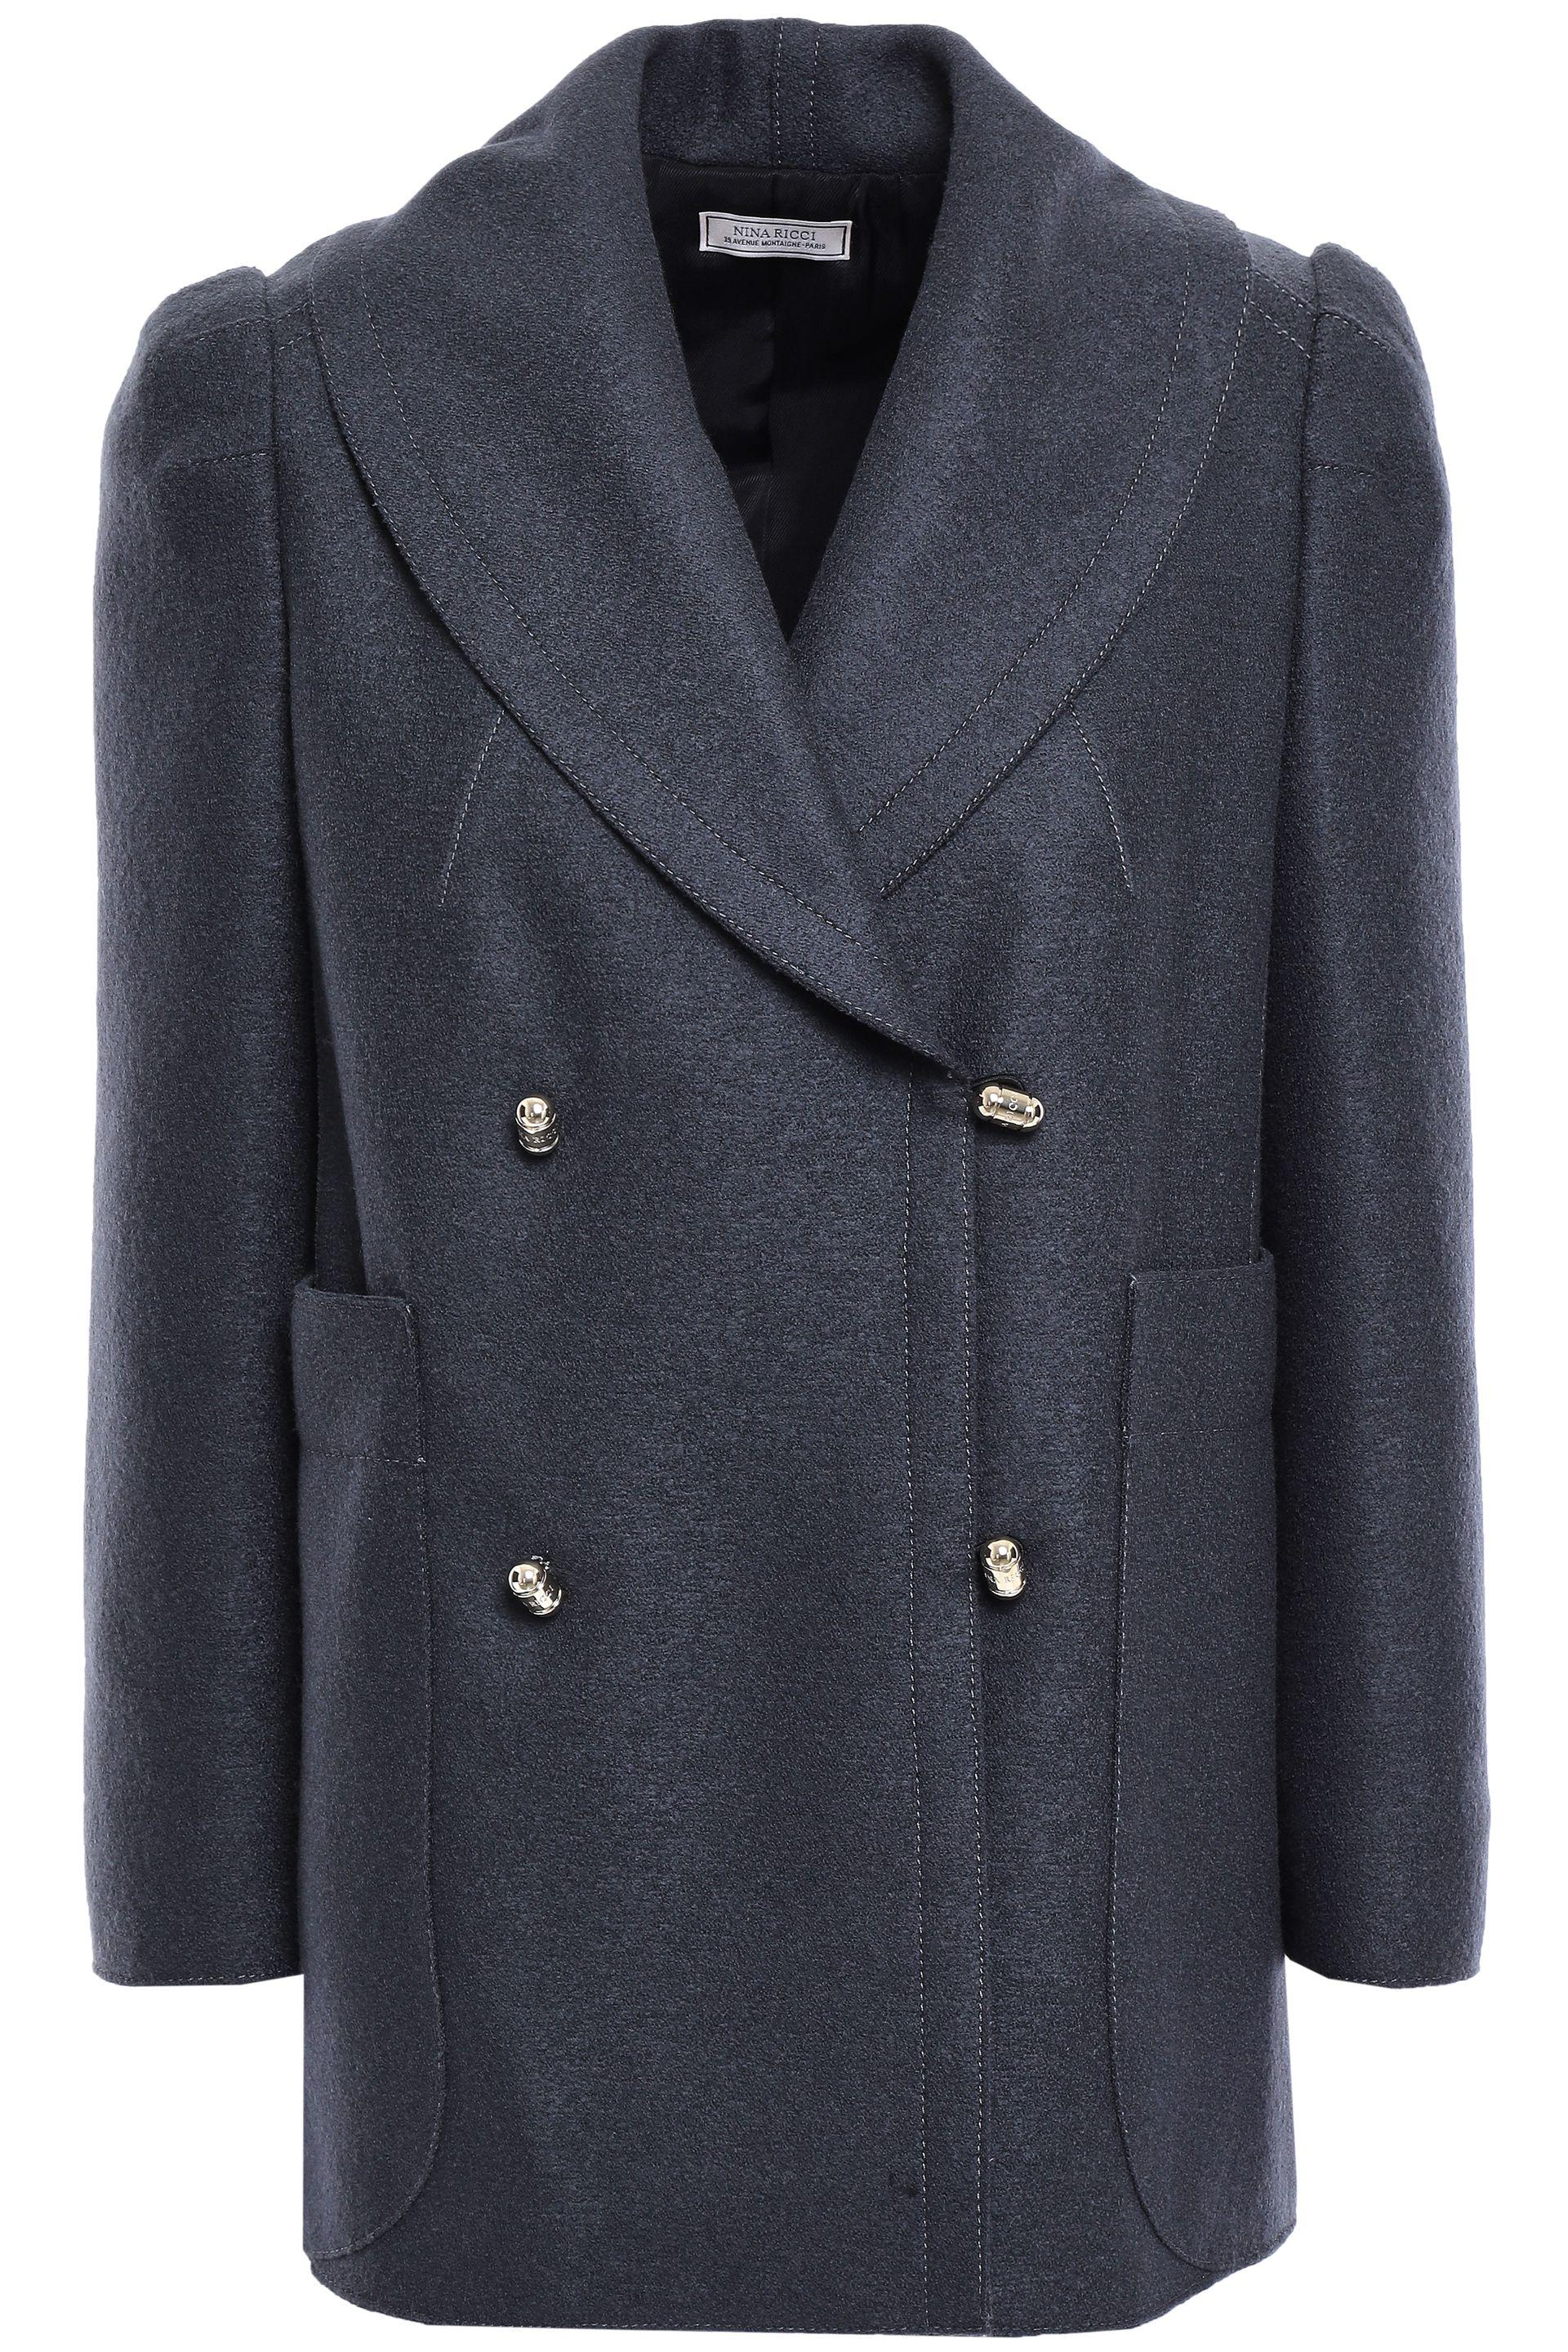 Nina Ricci Double-breasted Wool-felt Coat Anthracite in Gray - Lyst